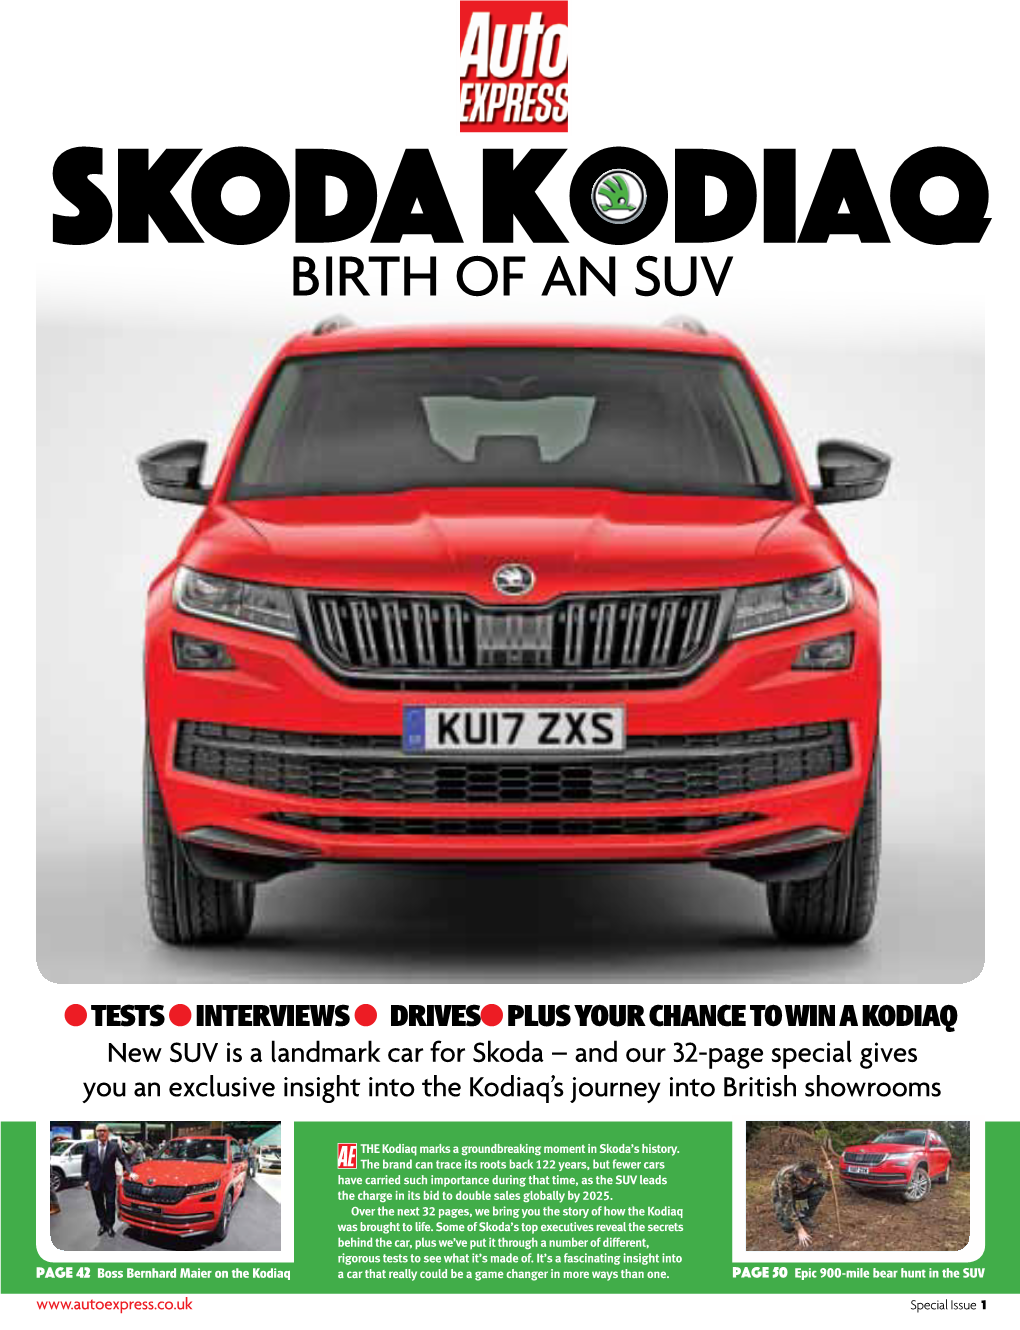 Birth of an SUV Skoda Boss Bernhard Maier Explains How the Kodiaq Is Set to Lead the Czech Company Into an Exciting New Era